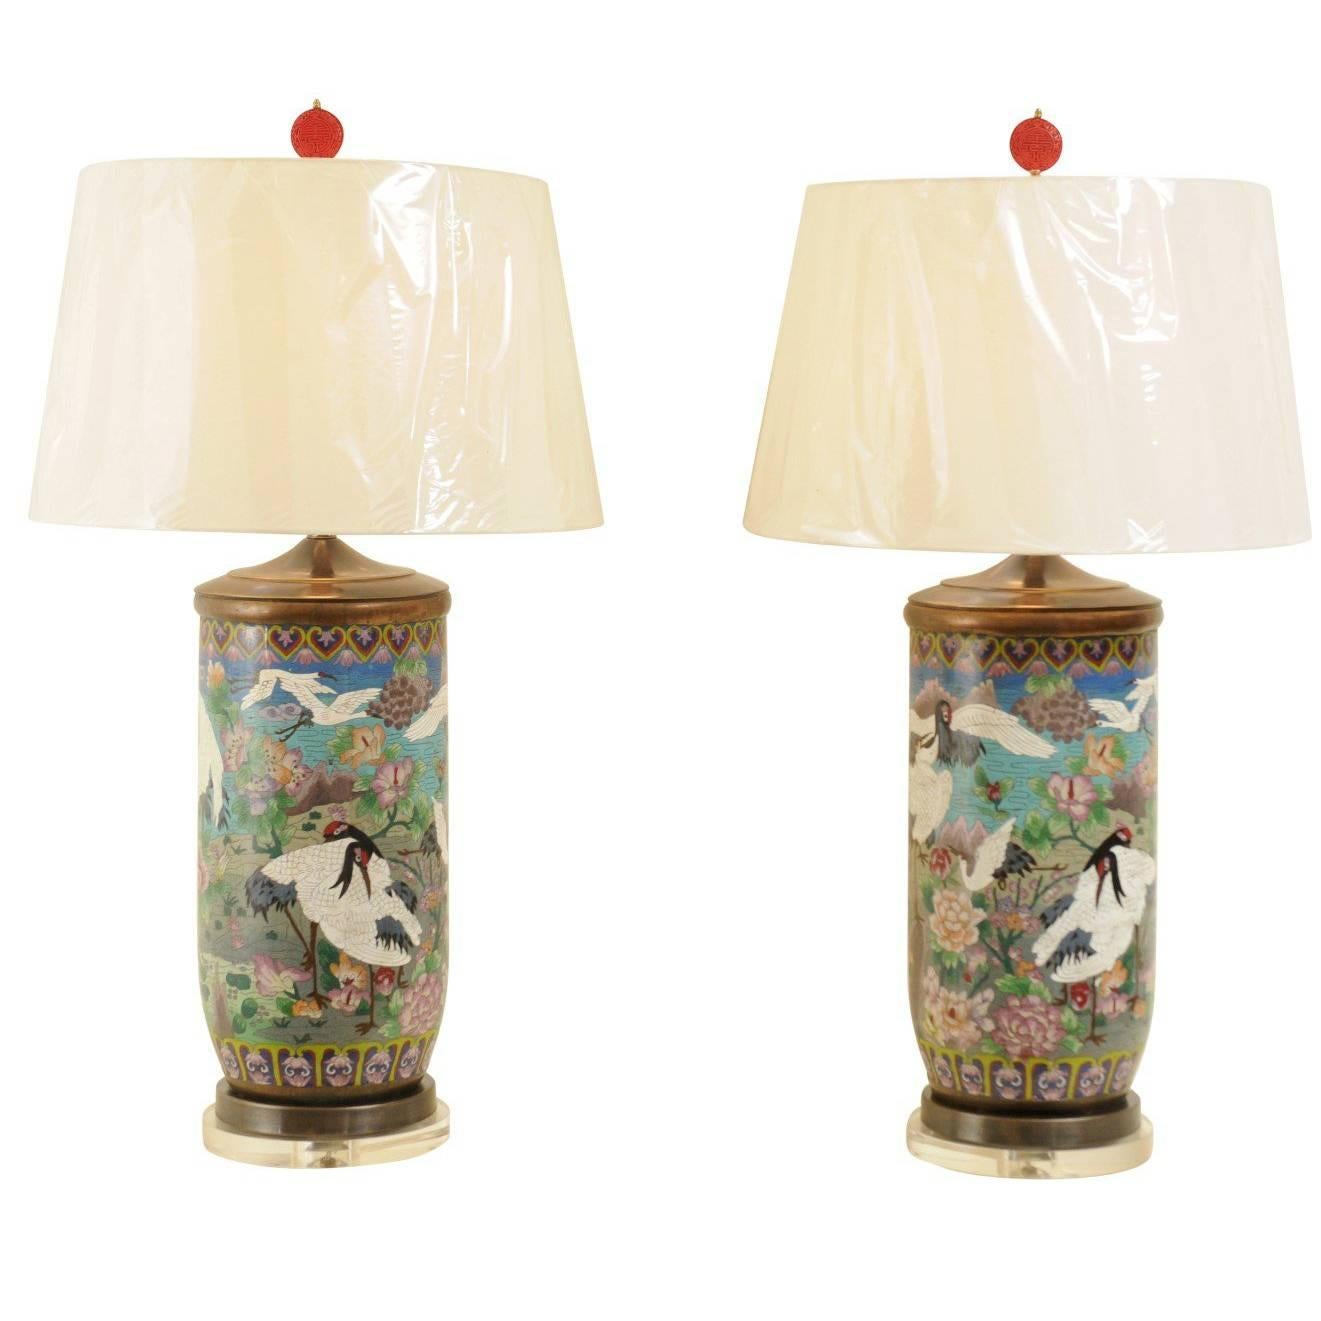  Jaw-Dropping Pair of Cloisonne Vessels as Custom Lamps For Sale